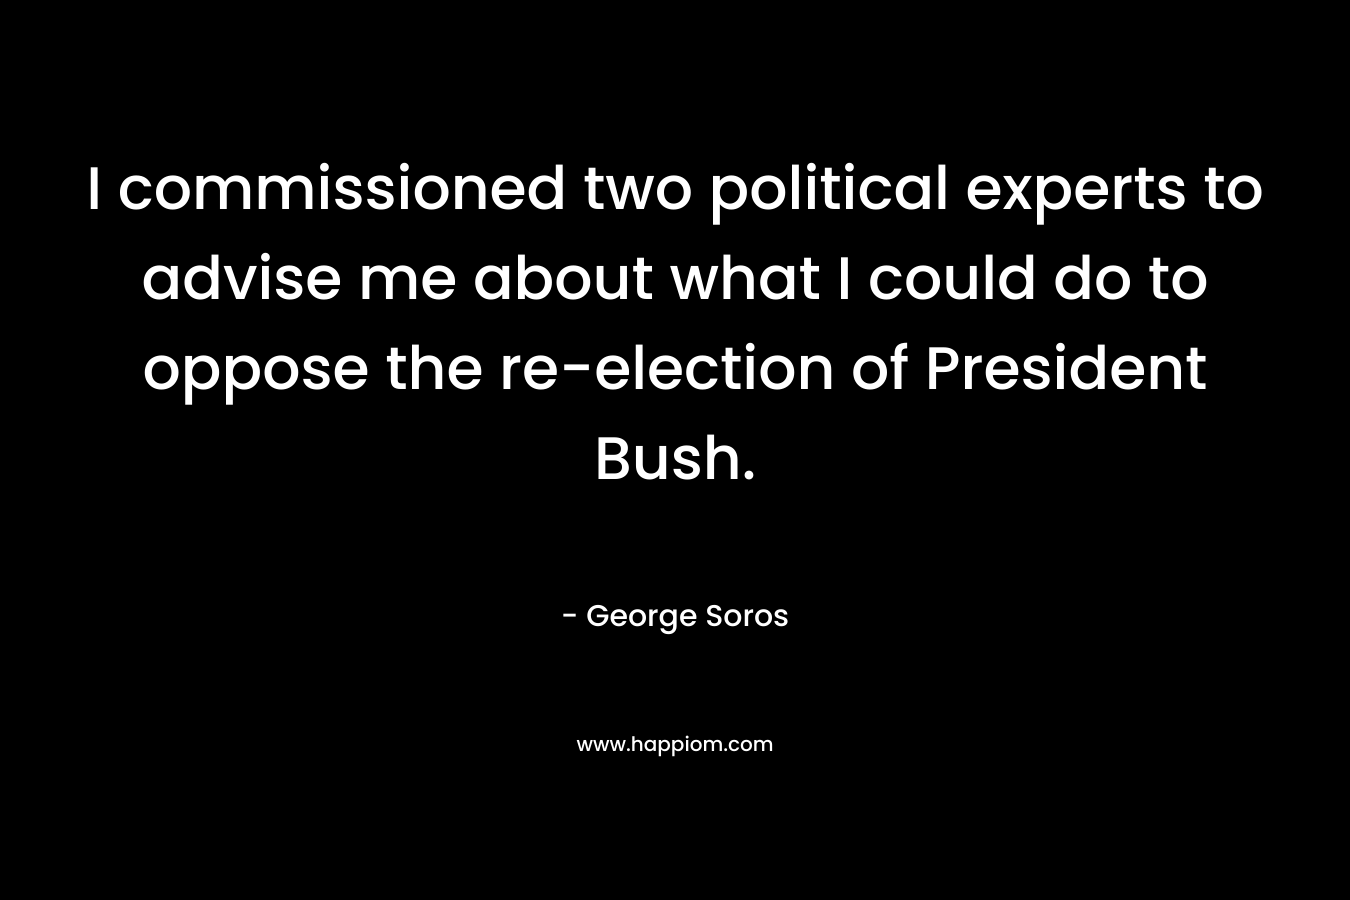 I commissioned two political experts to advise me about what I could do to oppose the re-election of President Bush.